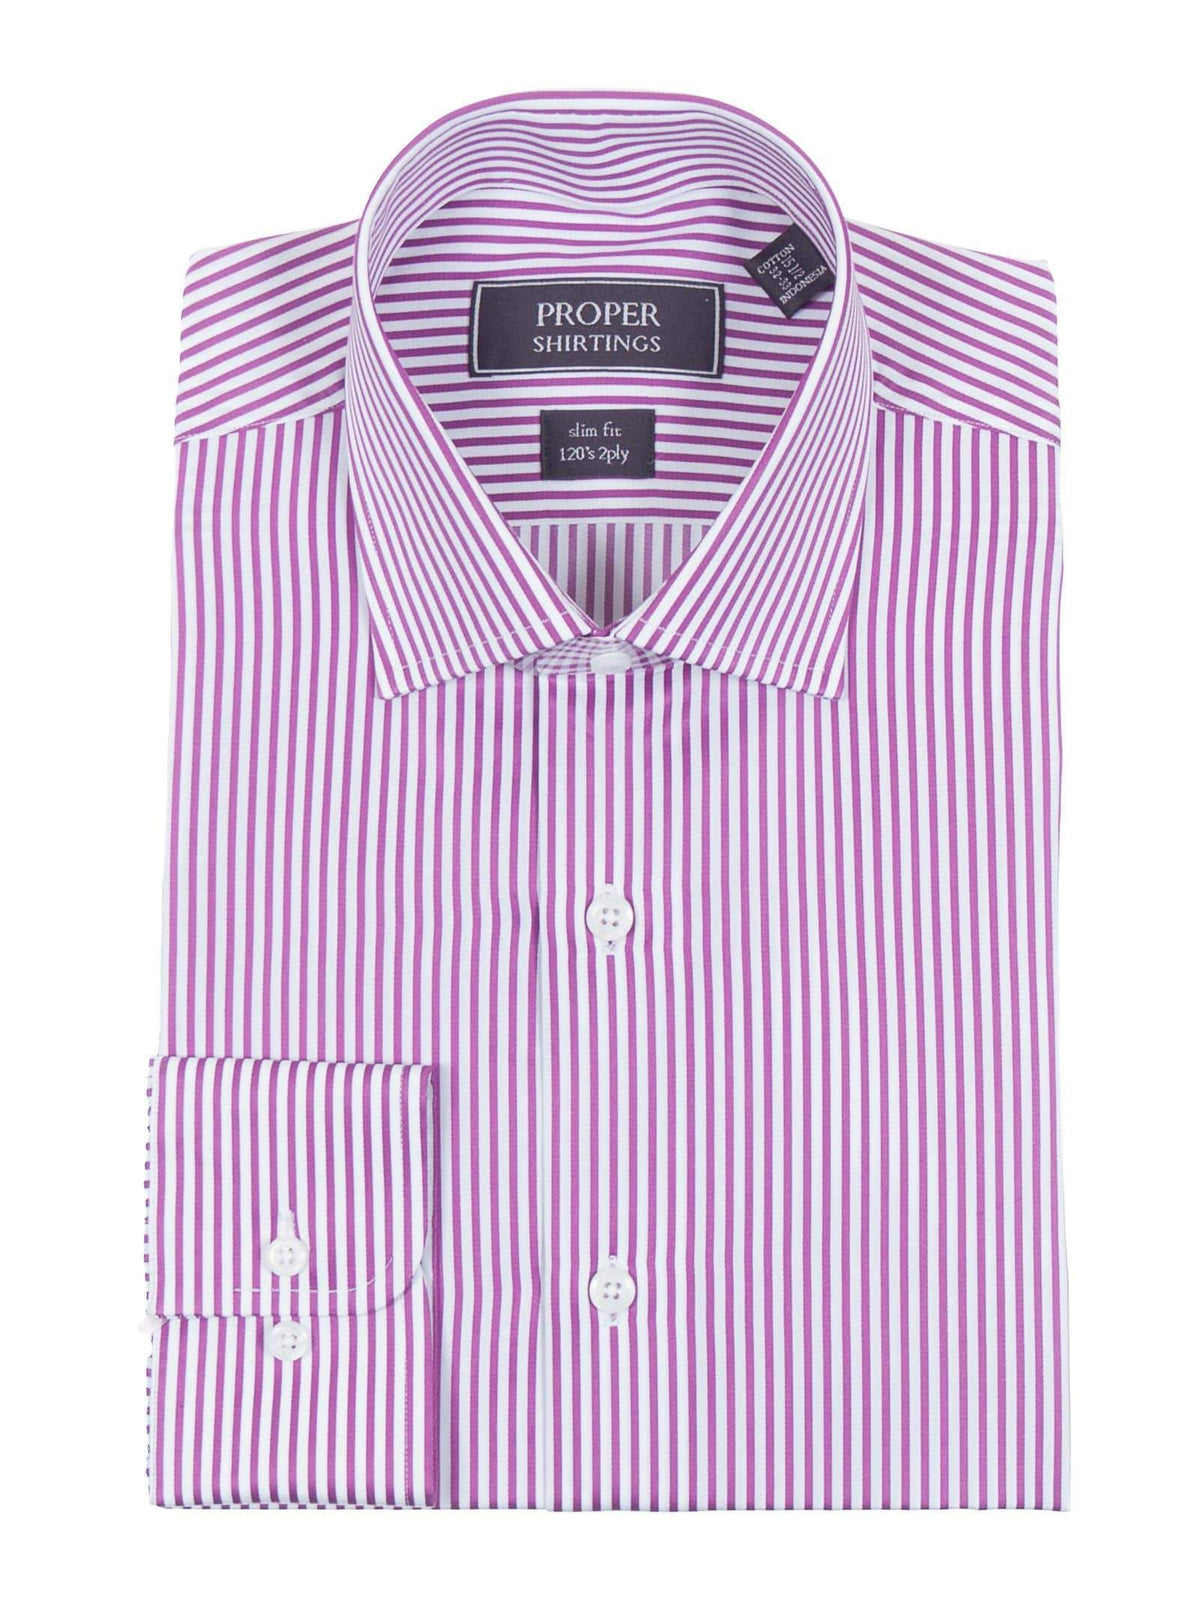 Proper Shirtings SHIRTS 16 34/35 Slim Fit Orchid Pink Striped Spread Collar 2 Ply Cotton Dress Shirt